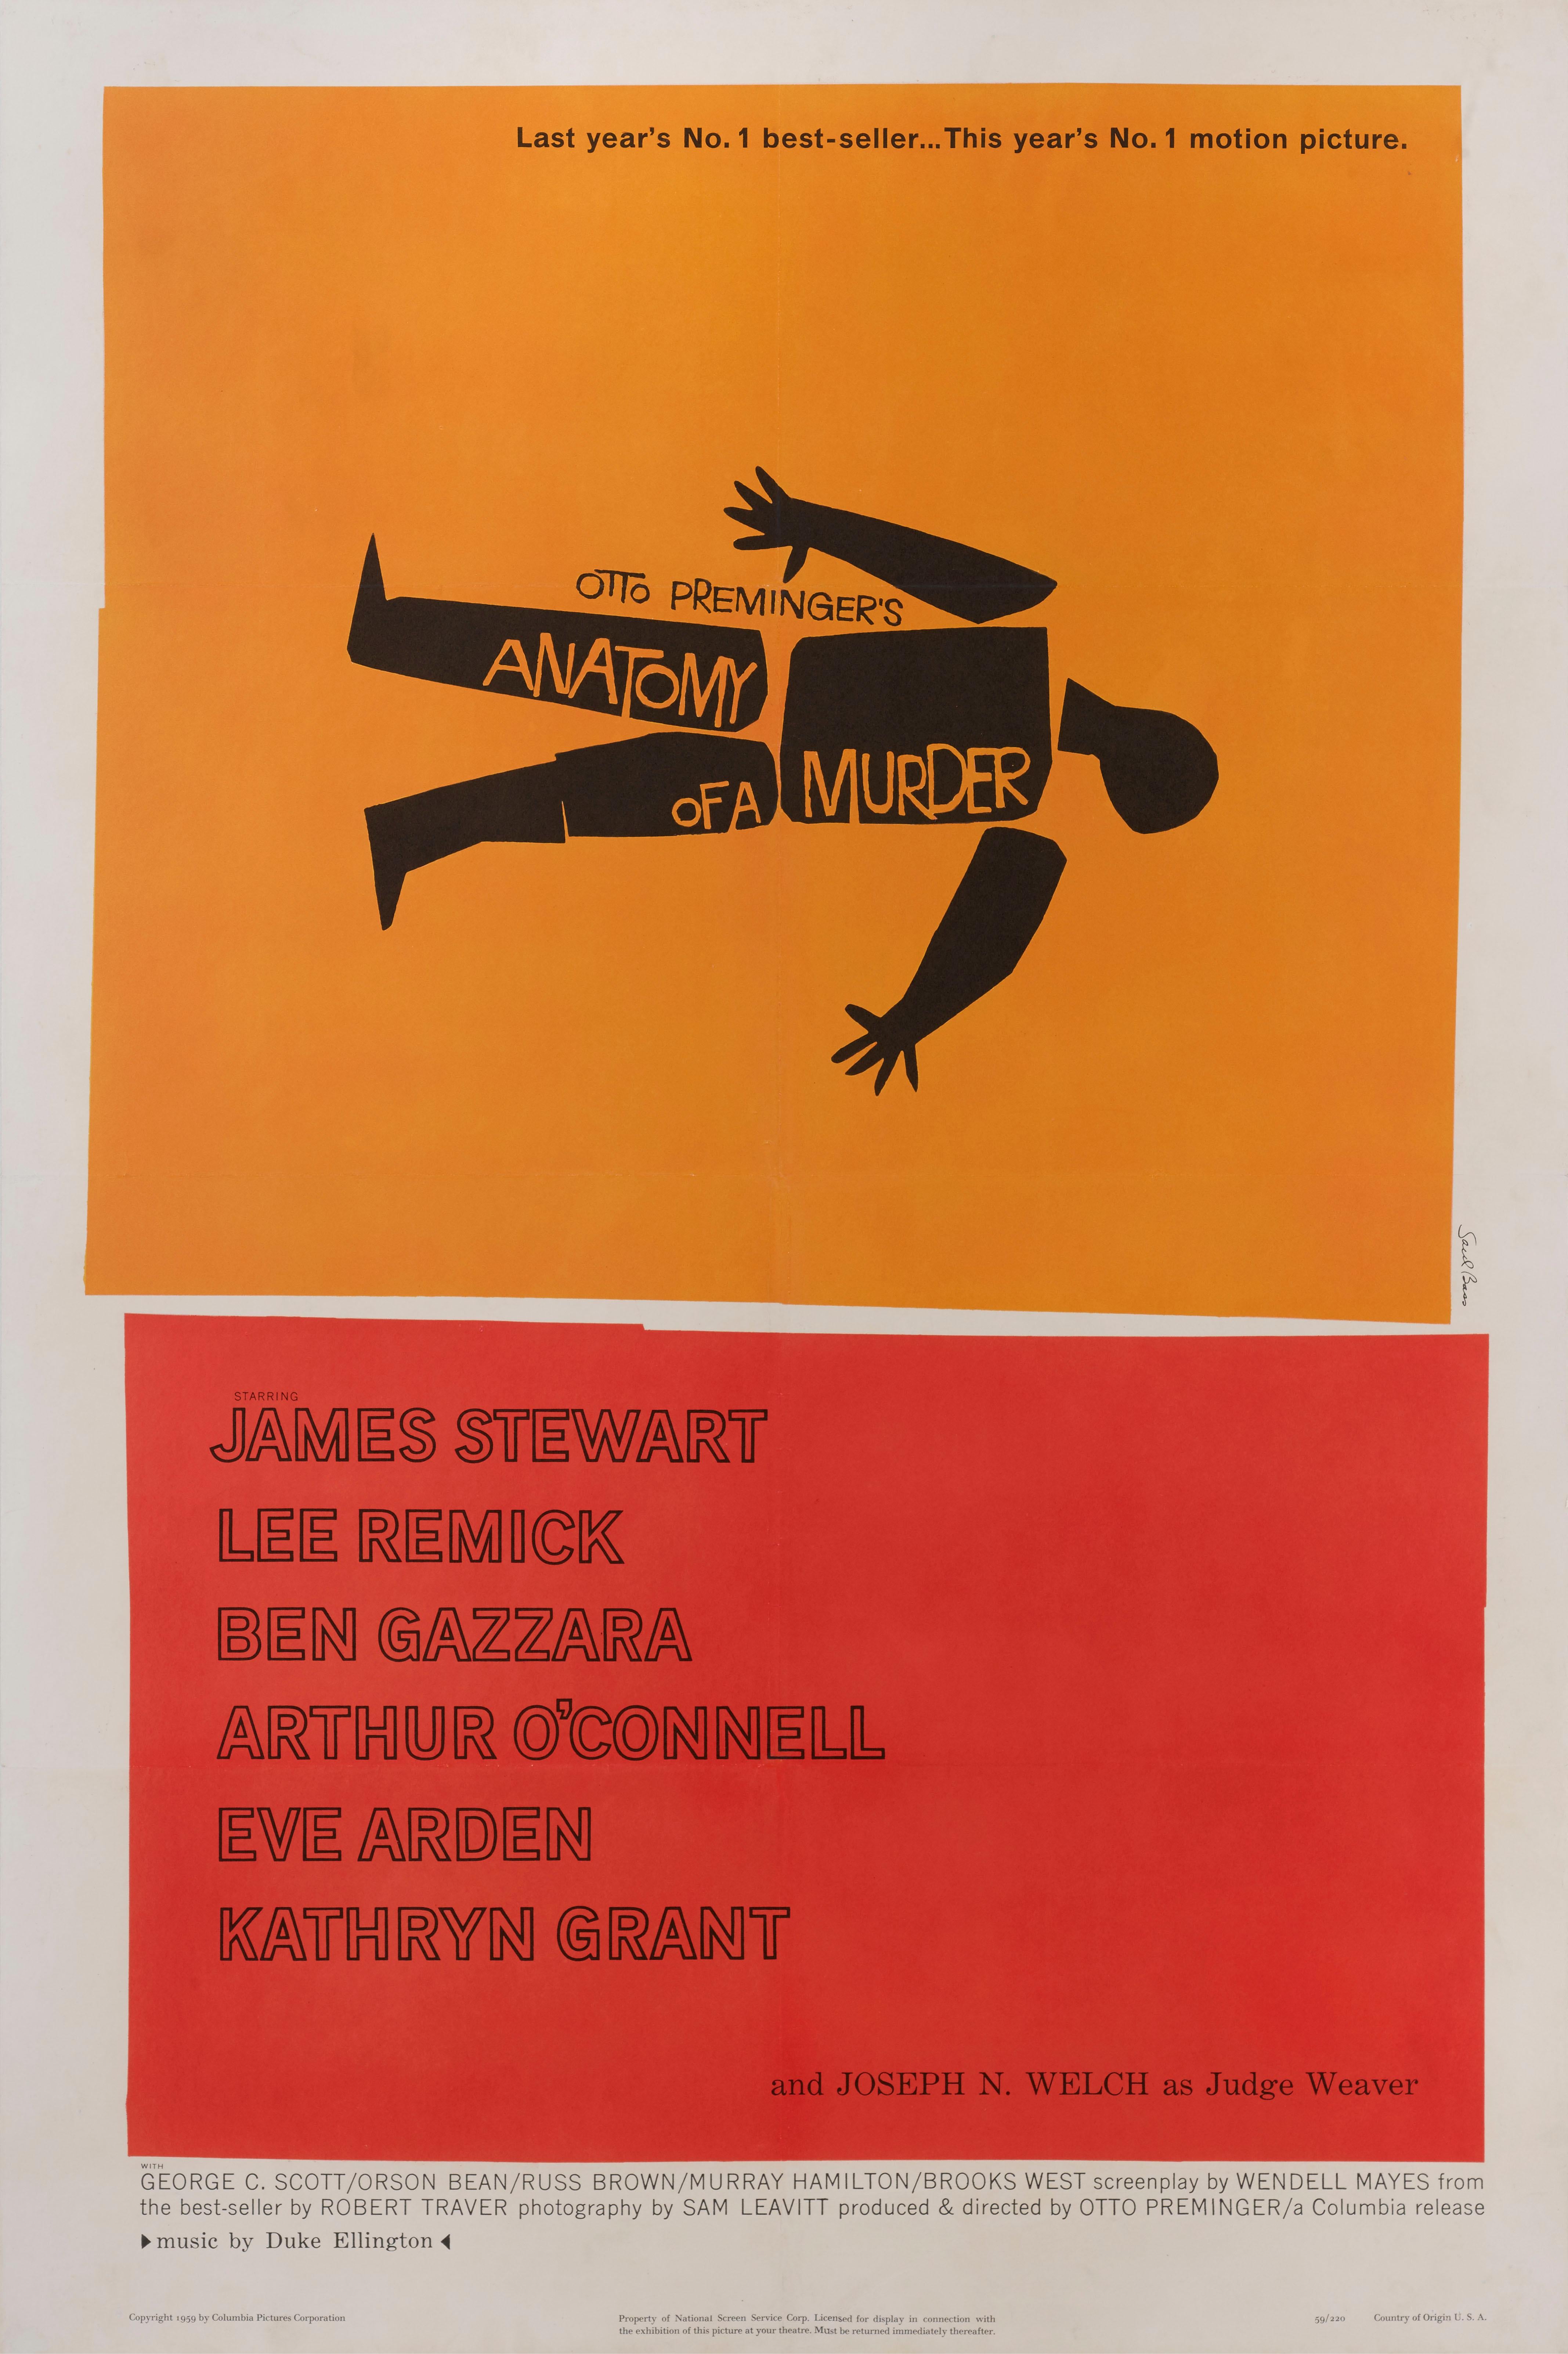 Original US film poster for Anatomy of a Murder (1959)
This film was directed by Otto Preminger, and stars James Stewart. It was one of the first mainstream Hollywood films to address sex and rape in graphic terms. It includes one of Saul Bass's